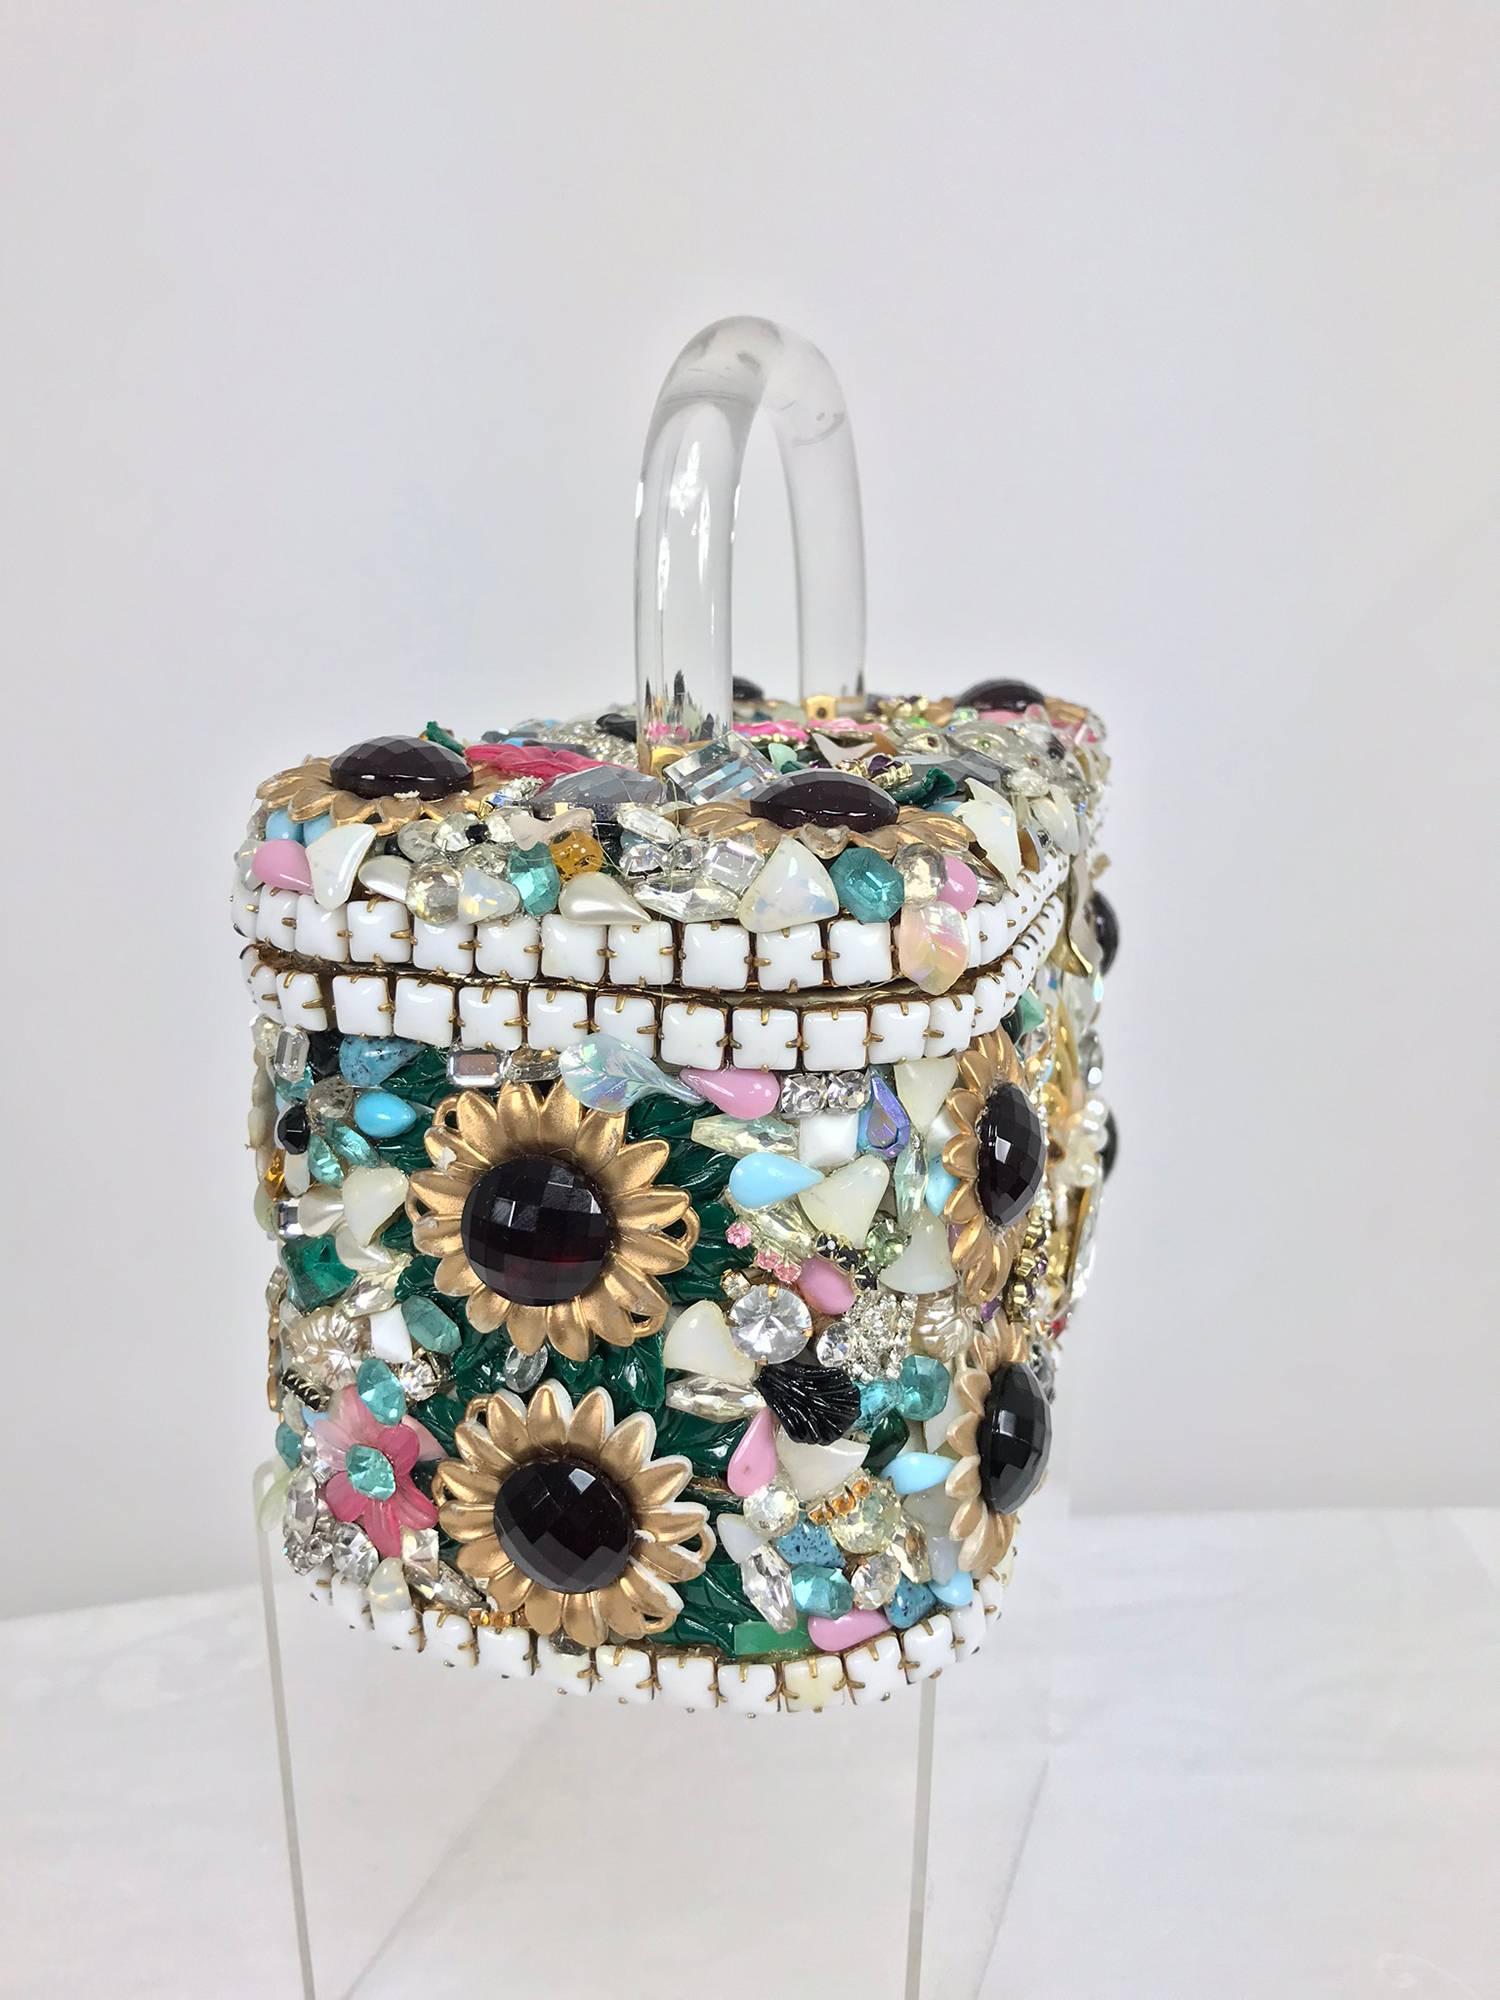 Custom made jewel encrusted Lucite hanle hand bag from the 1980s...Glittery bag covered with jewels, flowers, rhinestones, pearls, glass flowers, enamel flowers and much much more! Rising above is a clear Lucite handle...The bag has a gold metal